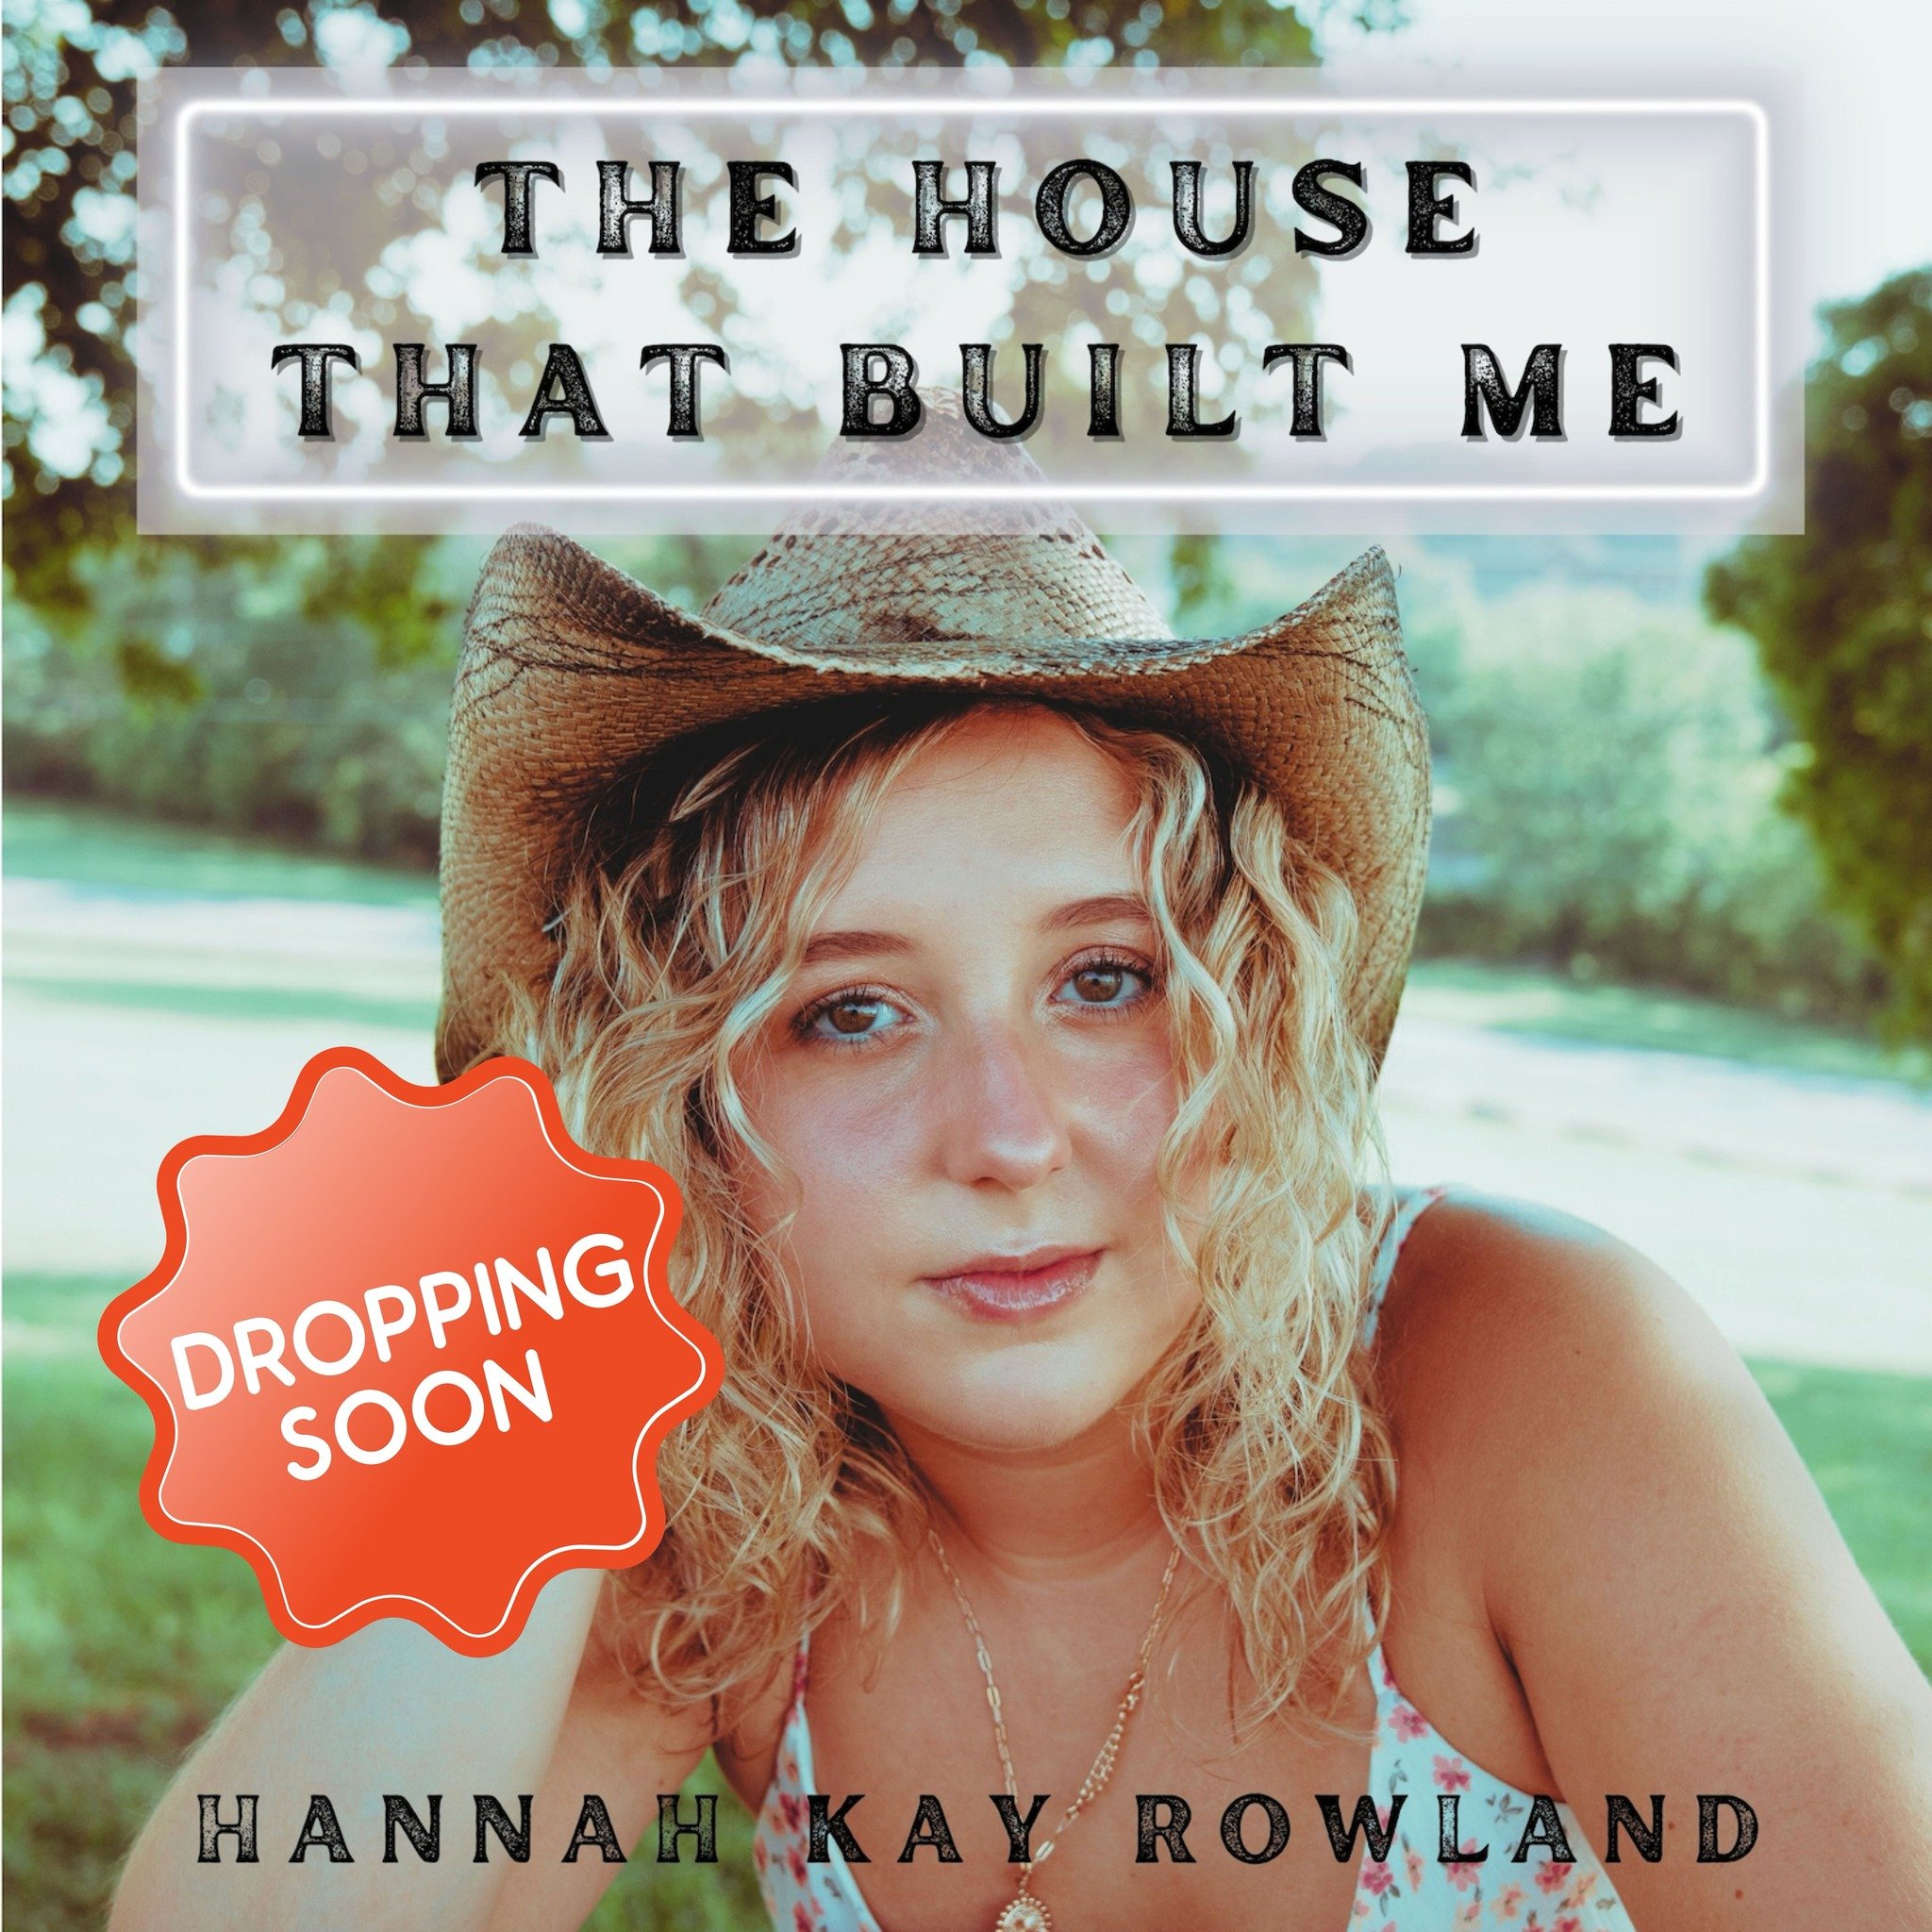 &ldquo;The House that Built Me&rdquo; is releasing this Thursday at midnight‼️‼️‼️ Stay tuned, I&rsquo;m excited for this one!!🤍 #HKR #recordingartist #housethatbuiltme #mirandalambert